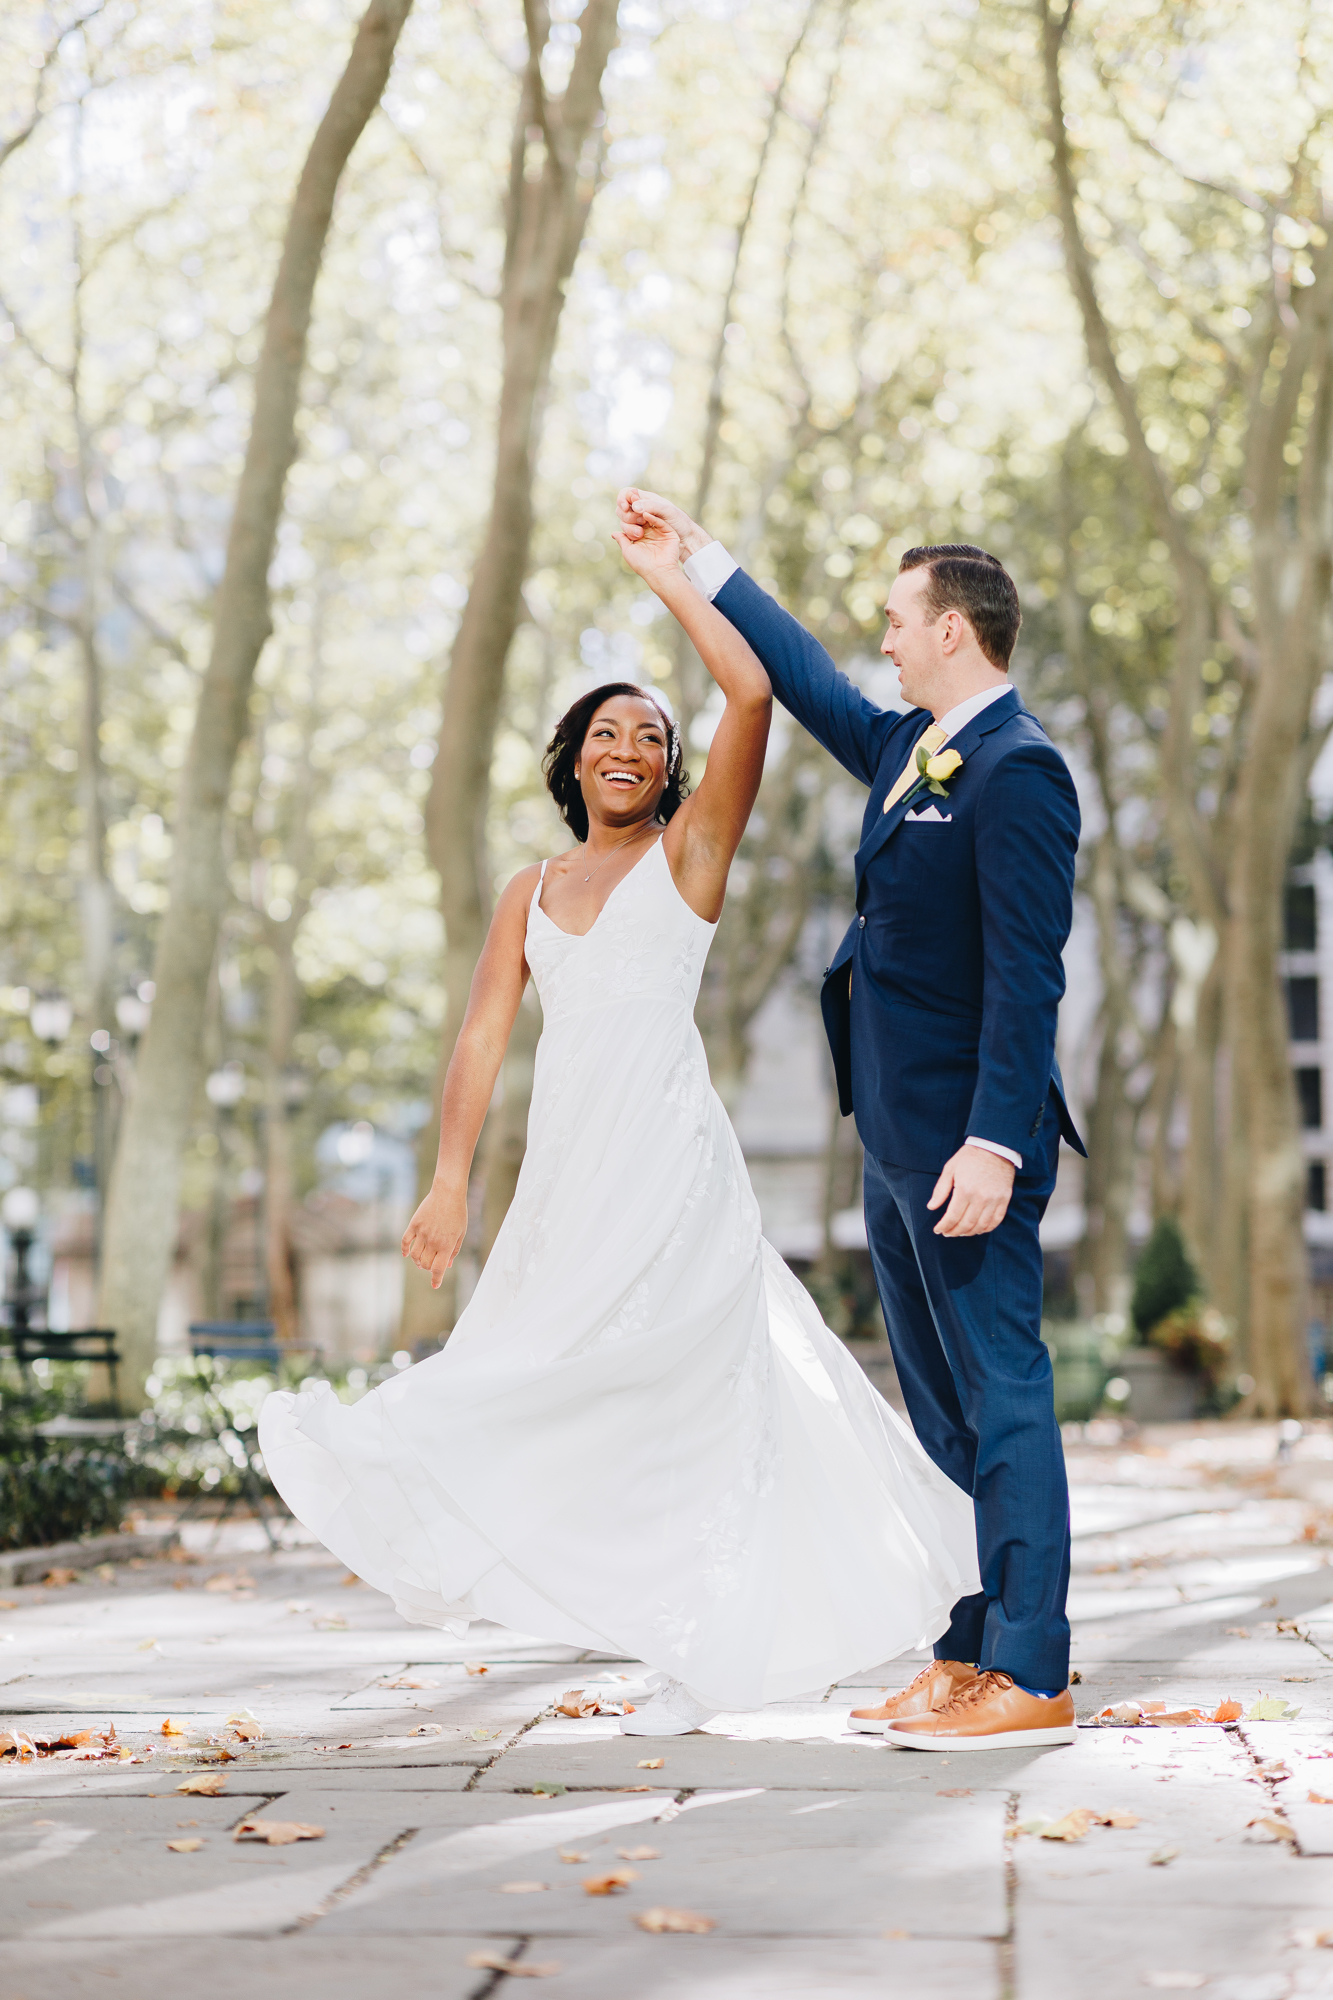 Sunny Bryant Park Wedding Photos during NYC Elopement